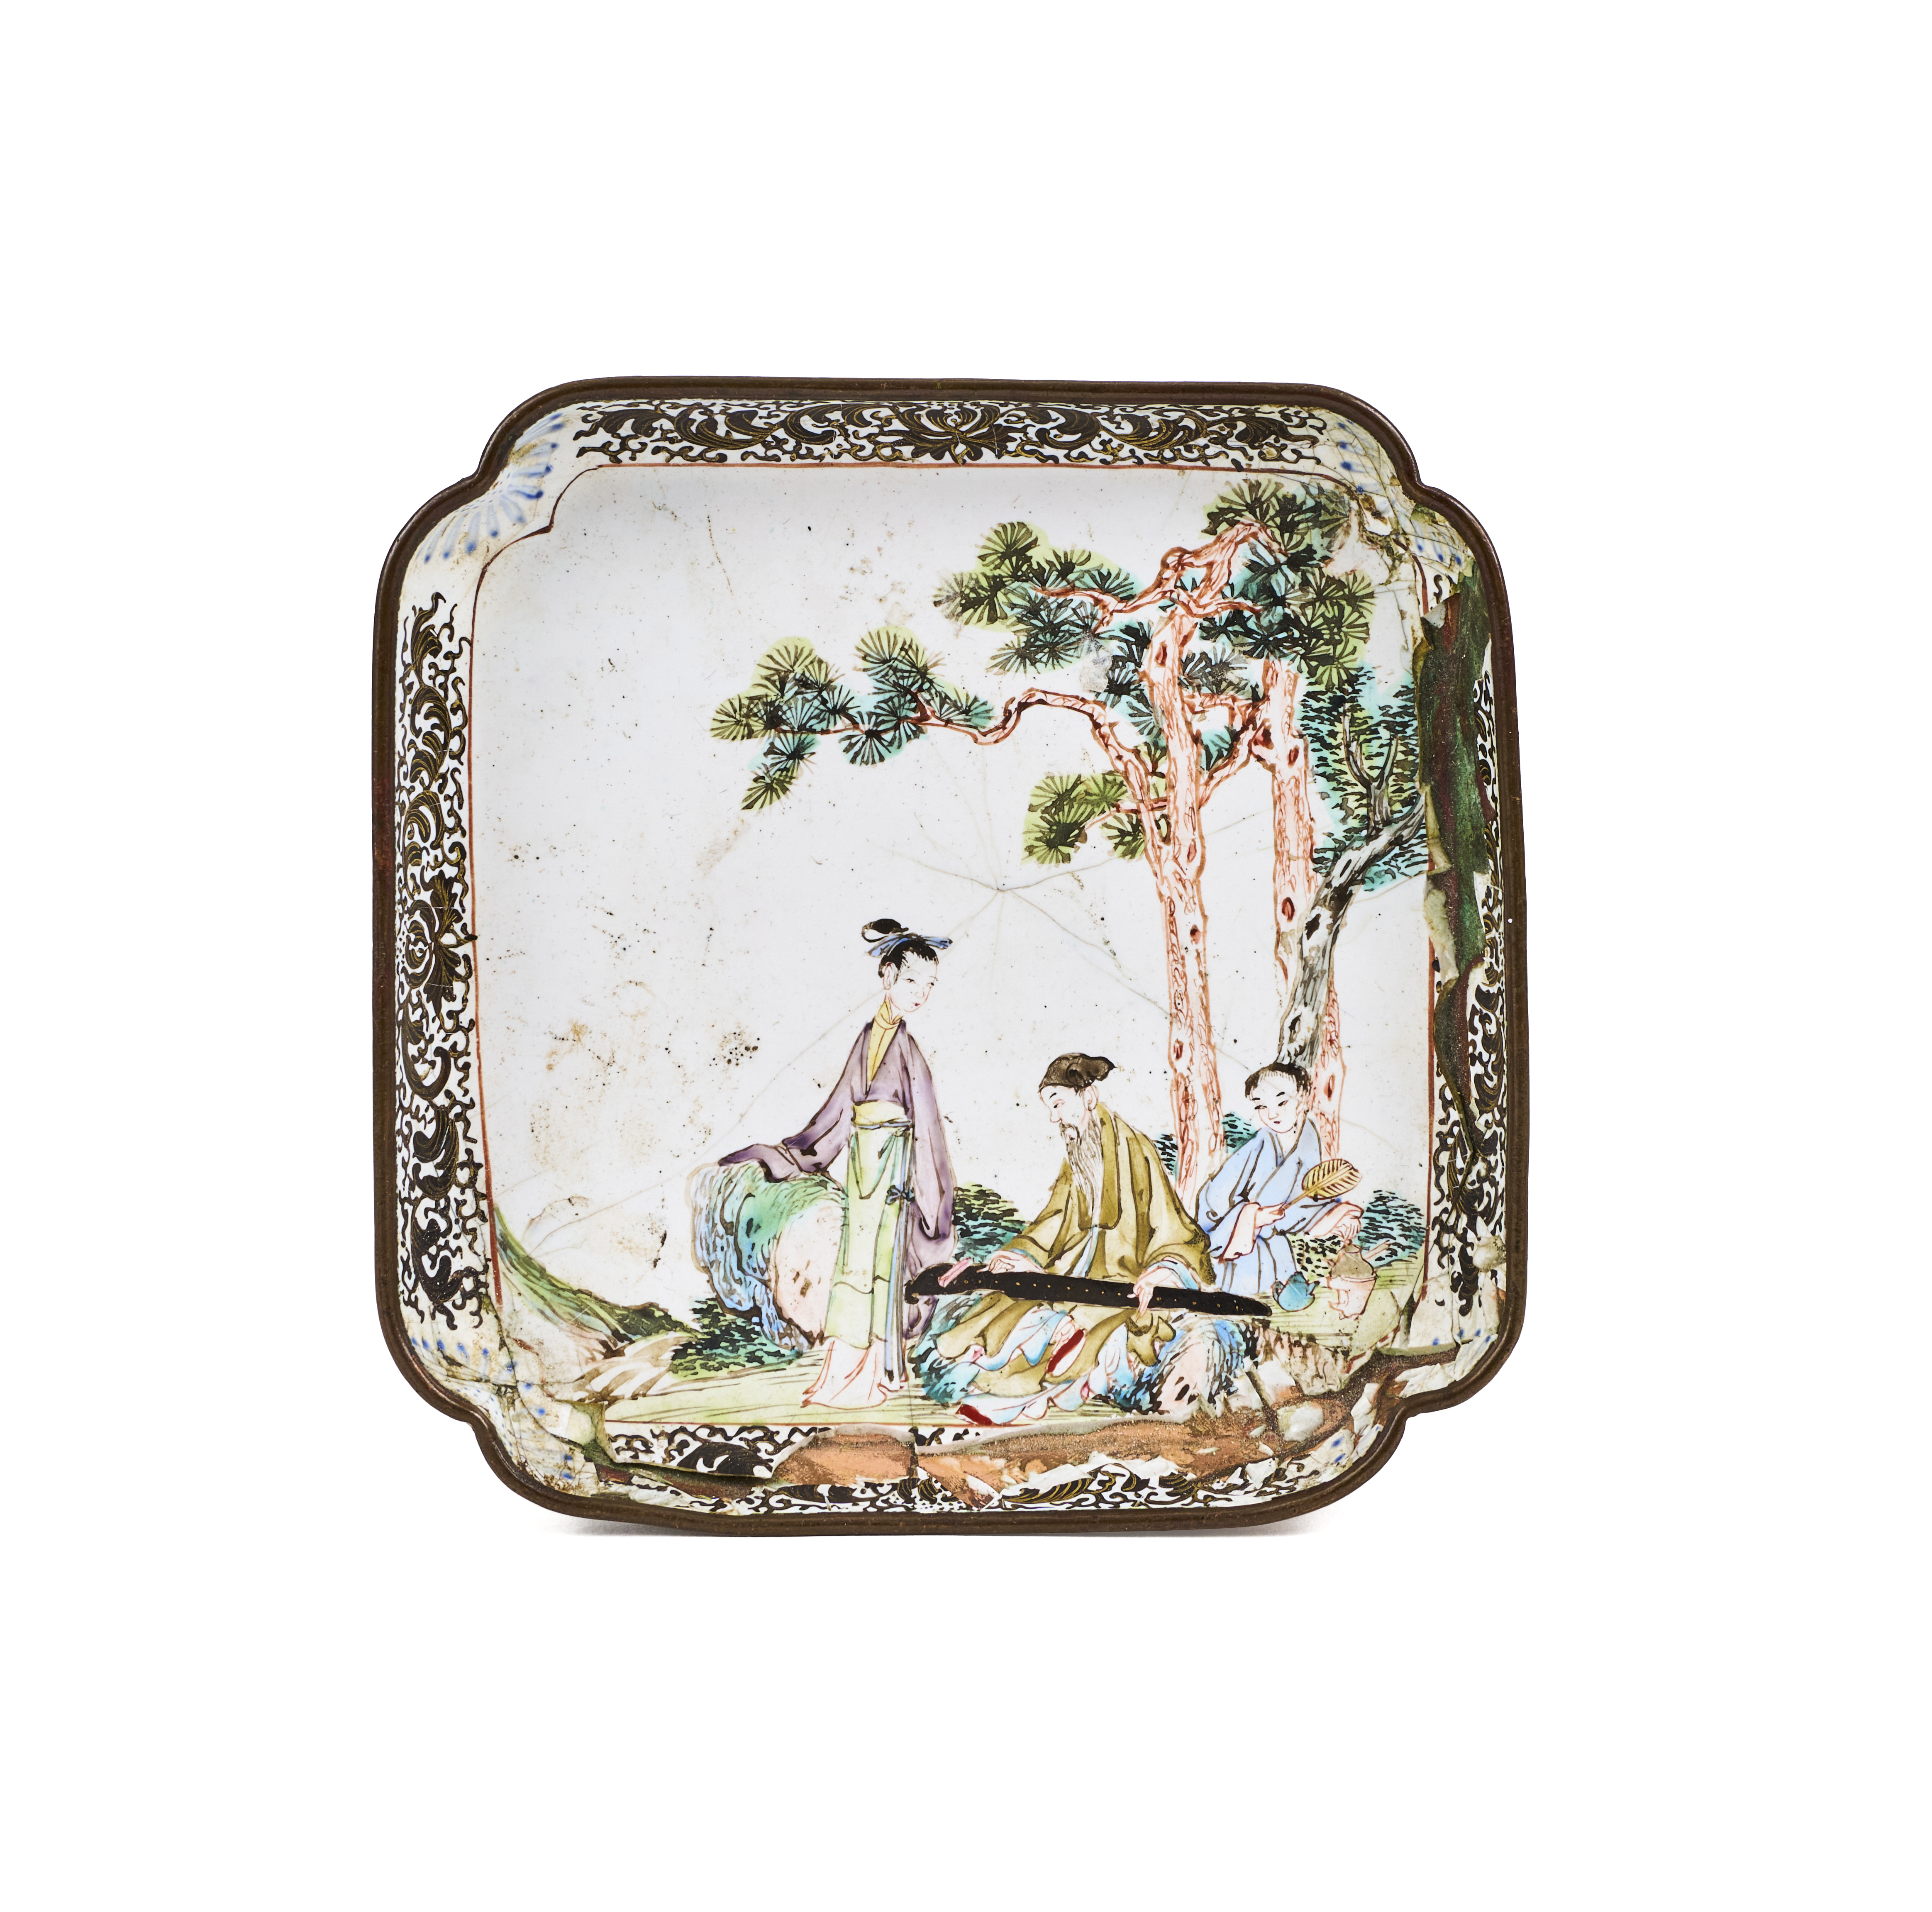 ASSORTMENT OF CHINESE CANTON ENAMEL OBJECTS, 18TH/19TH CENTURY - Image 4 of 6